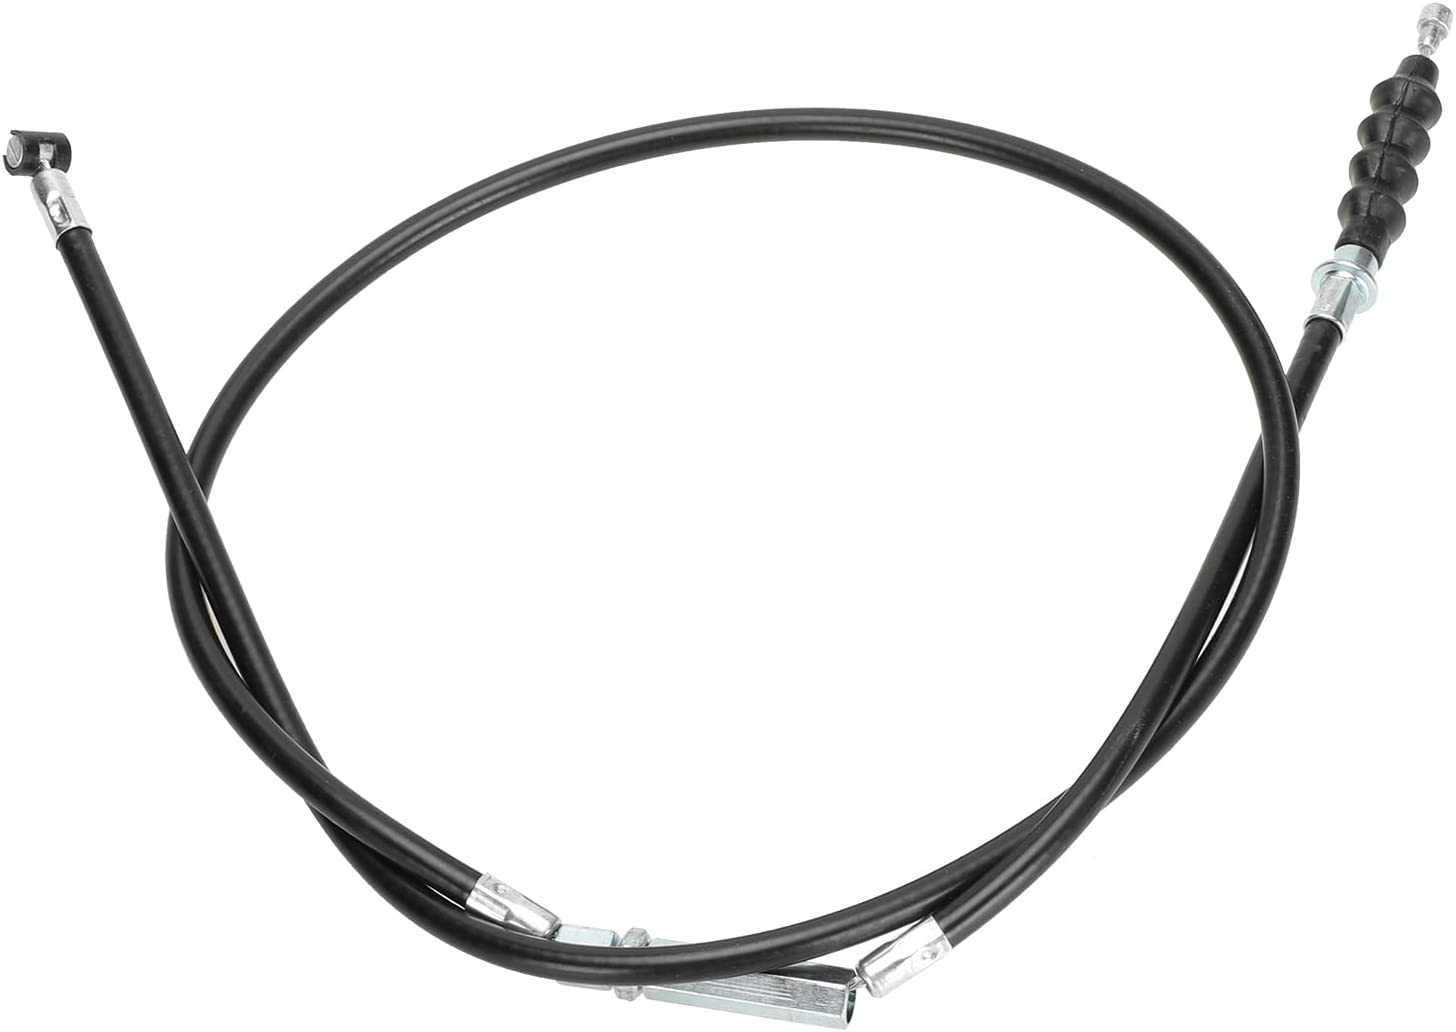 Creature Racing® 38" Apollo Dirt Bike Clutch Cable